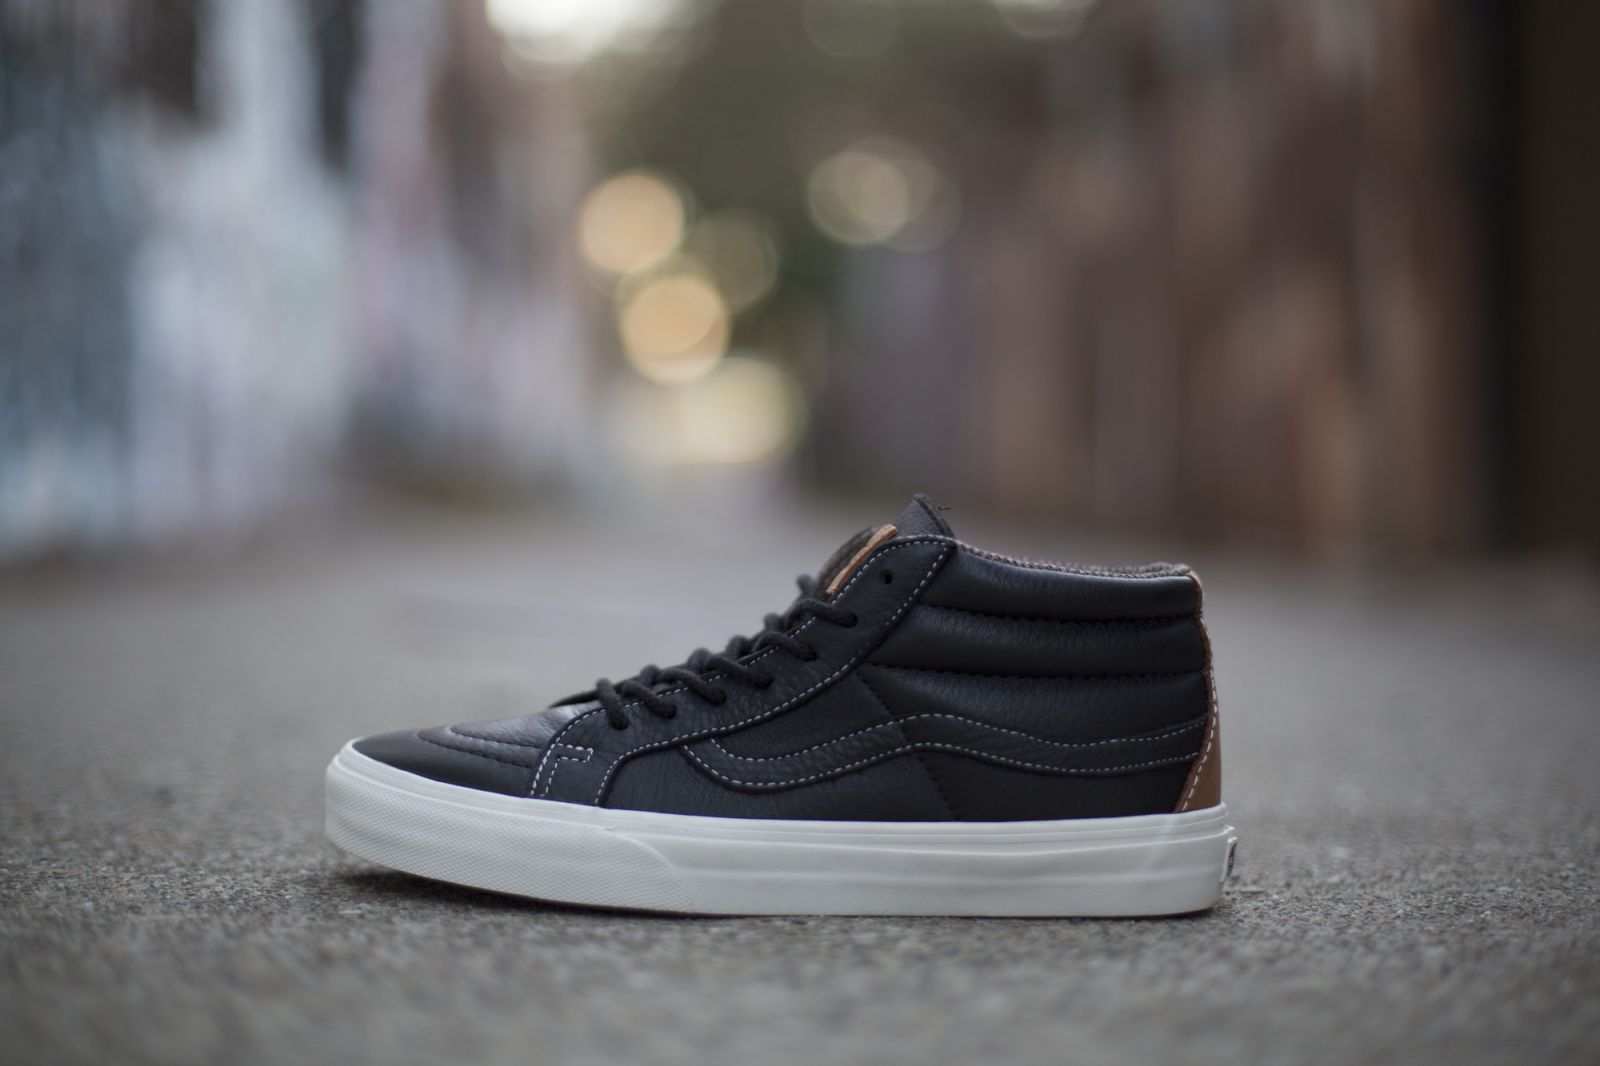 vans-california-sk8-mid-waxed-leather-pack-2